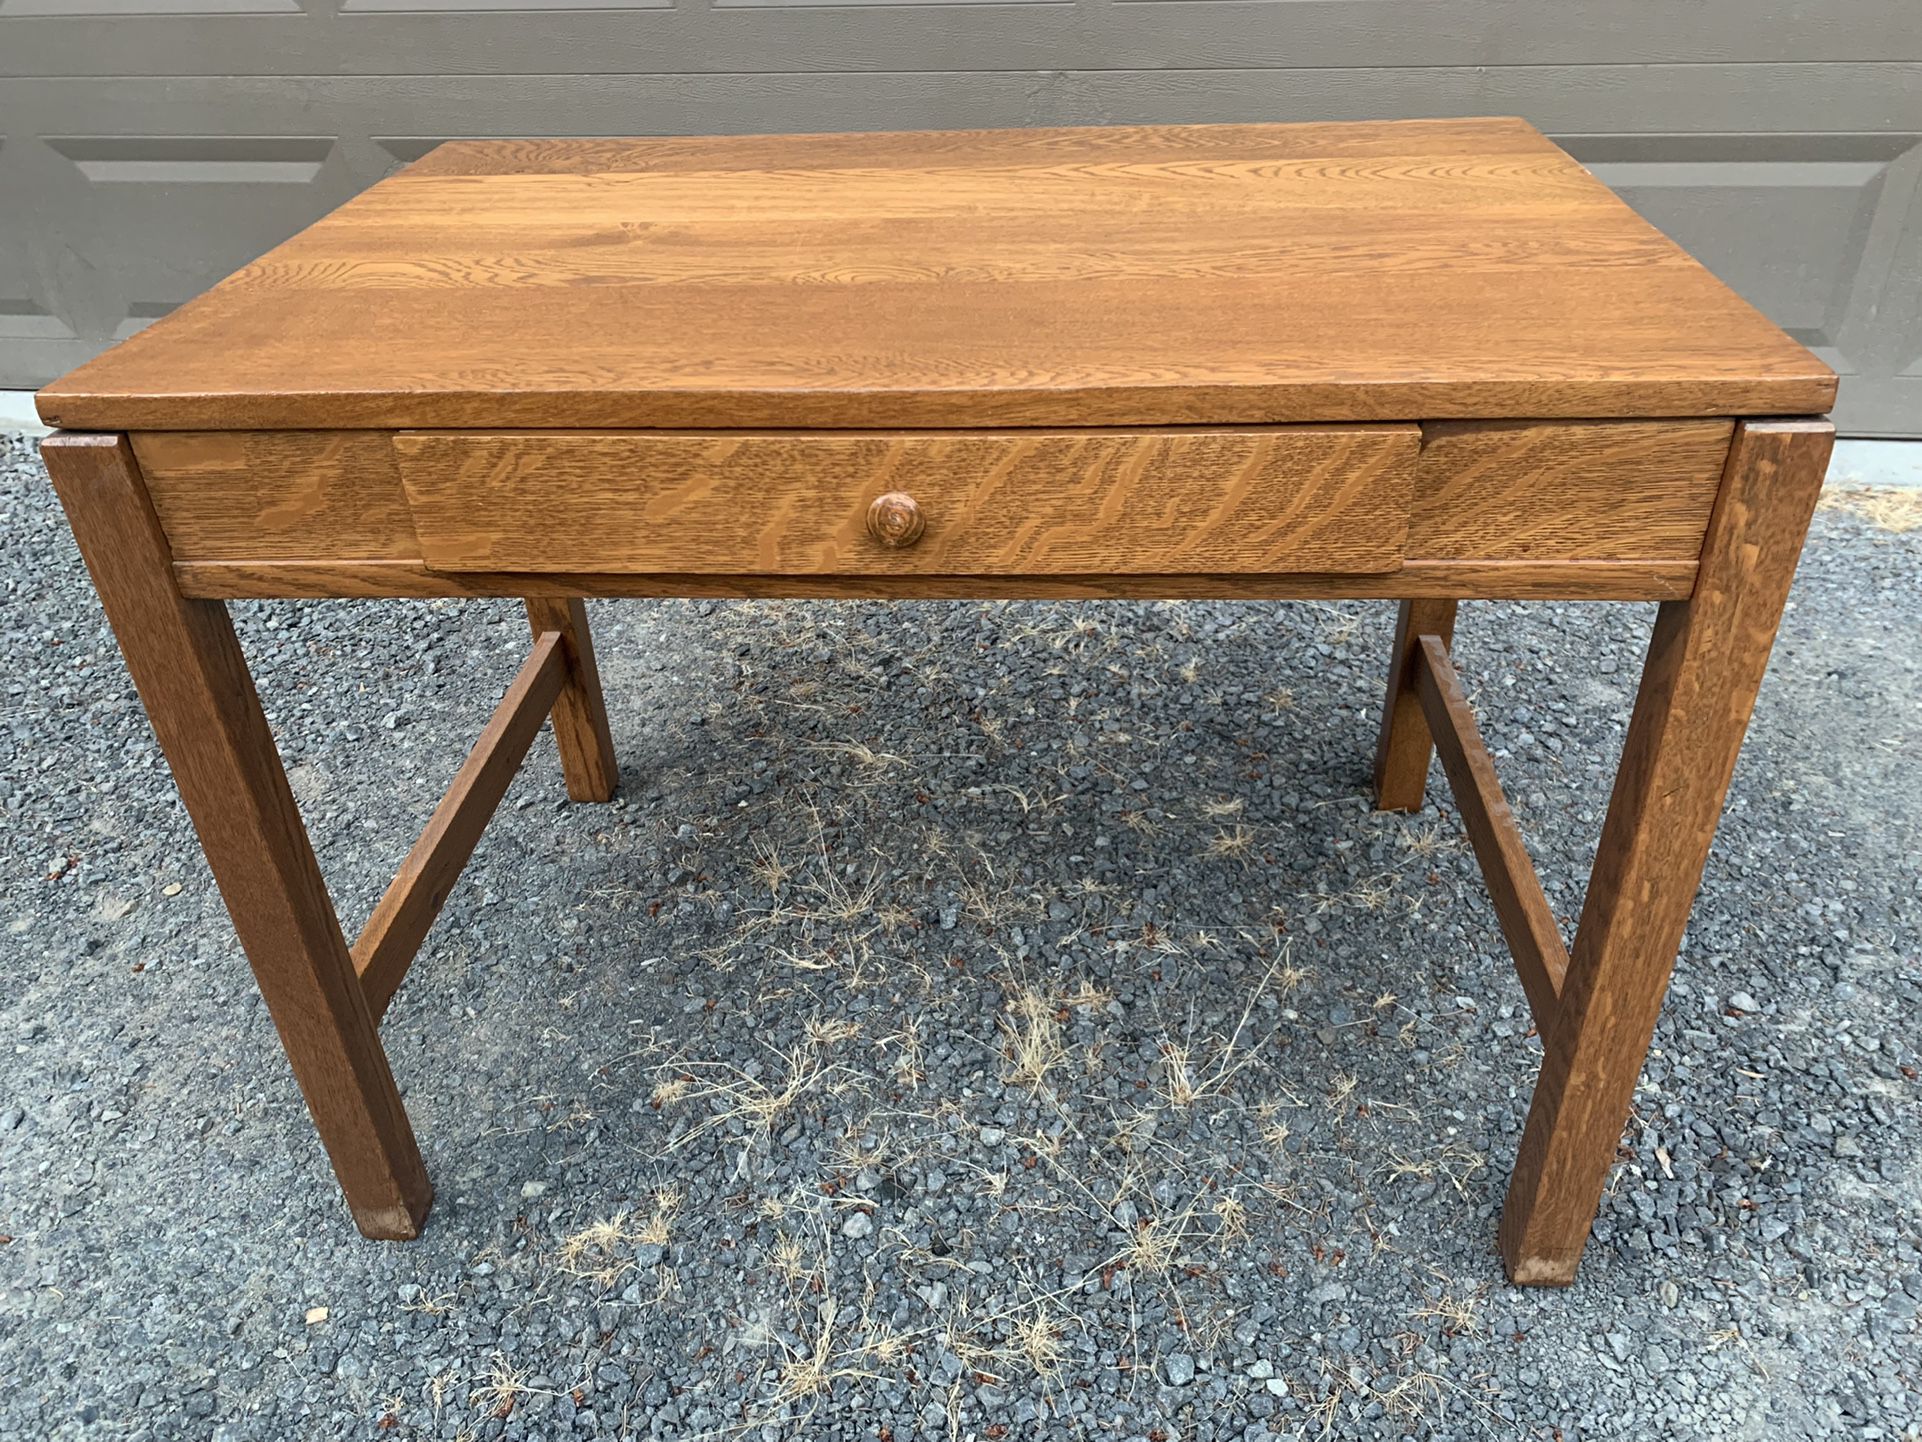 Antique Solid Wood Table Desk with Drawer